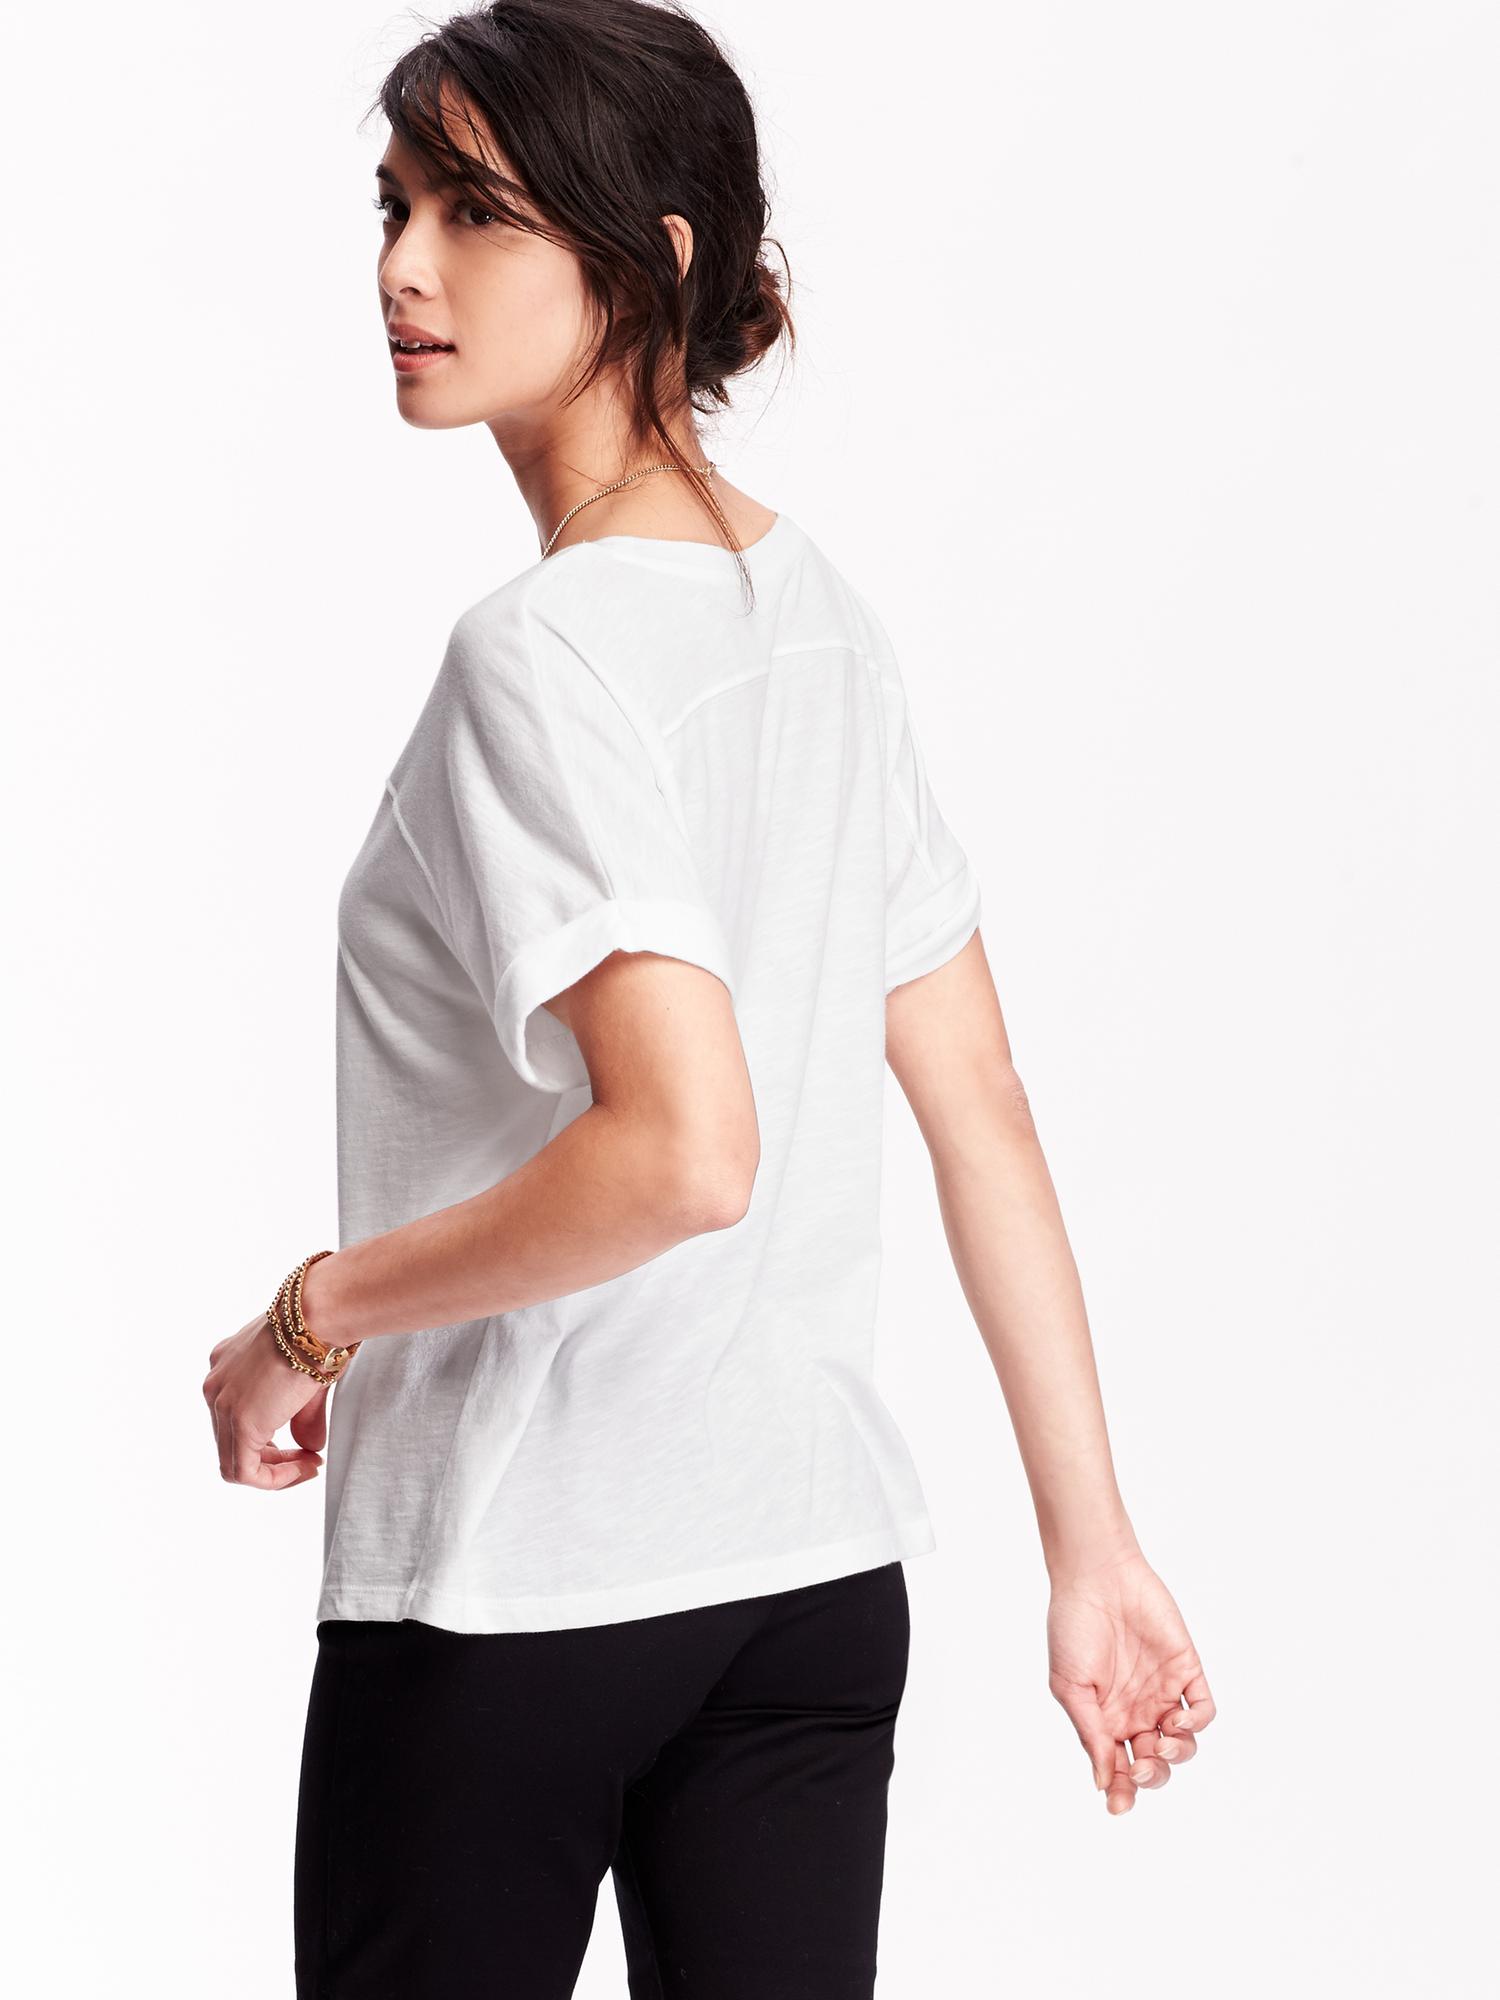 Women's Cuffed-Sleeve Graphic Tees | Old Navy